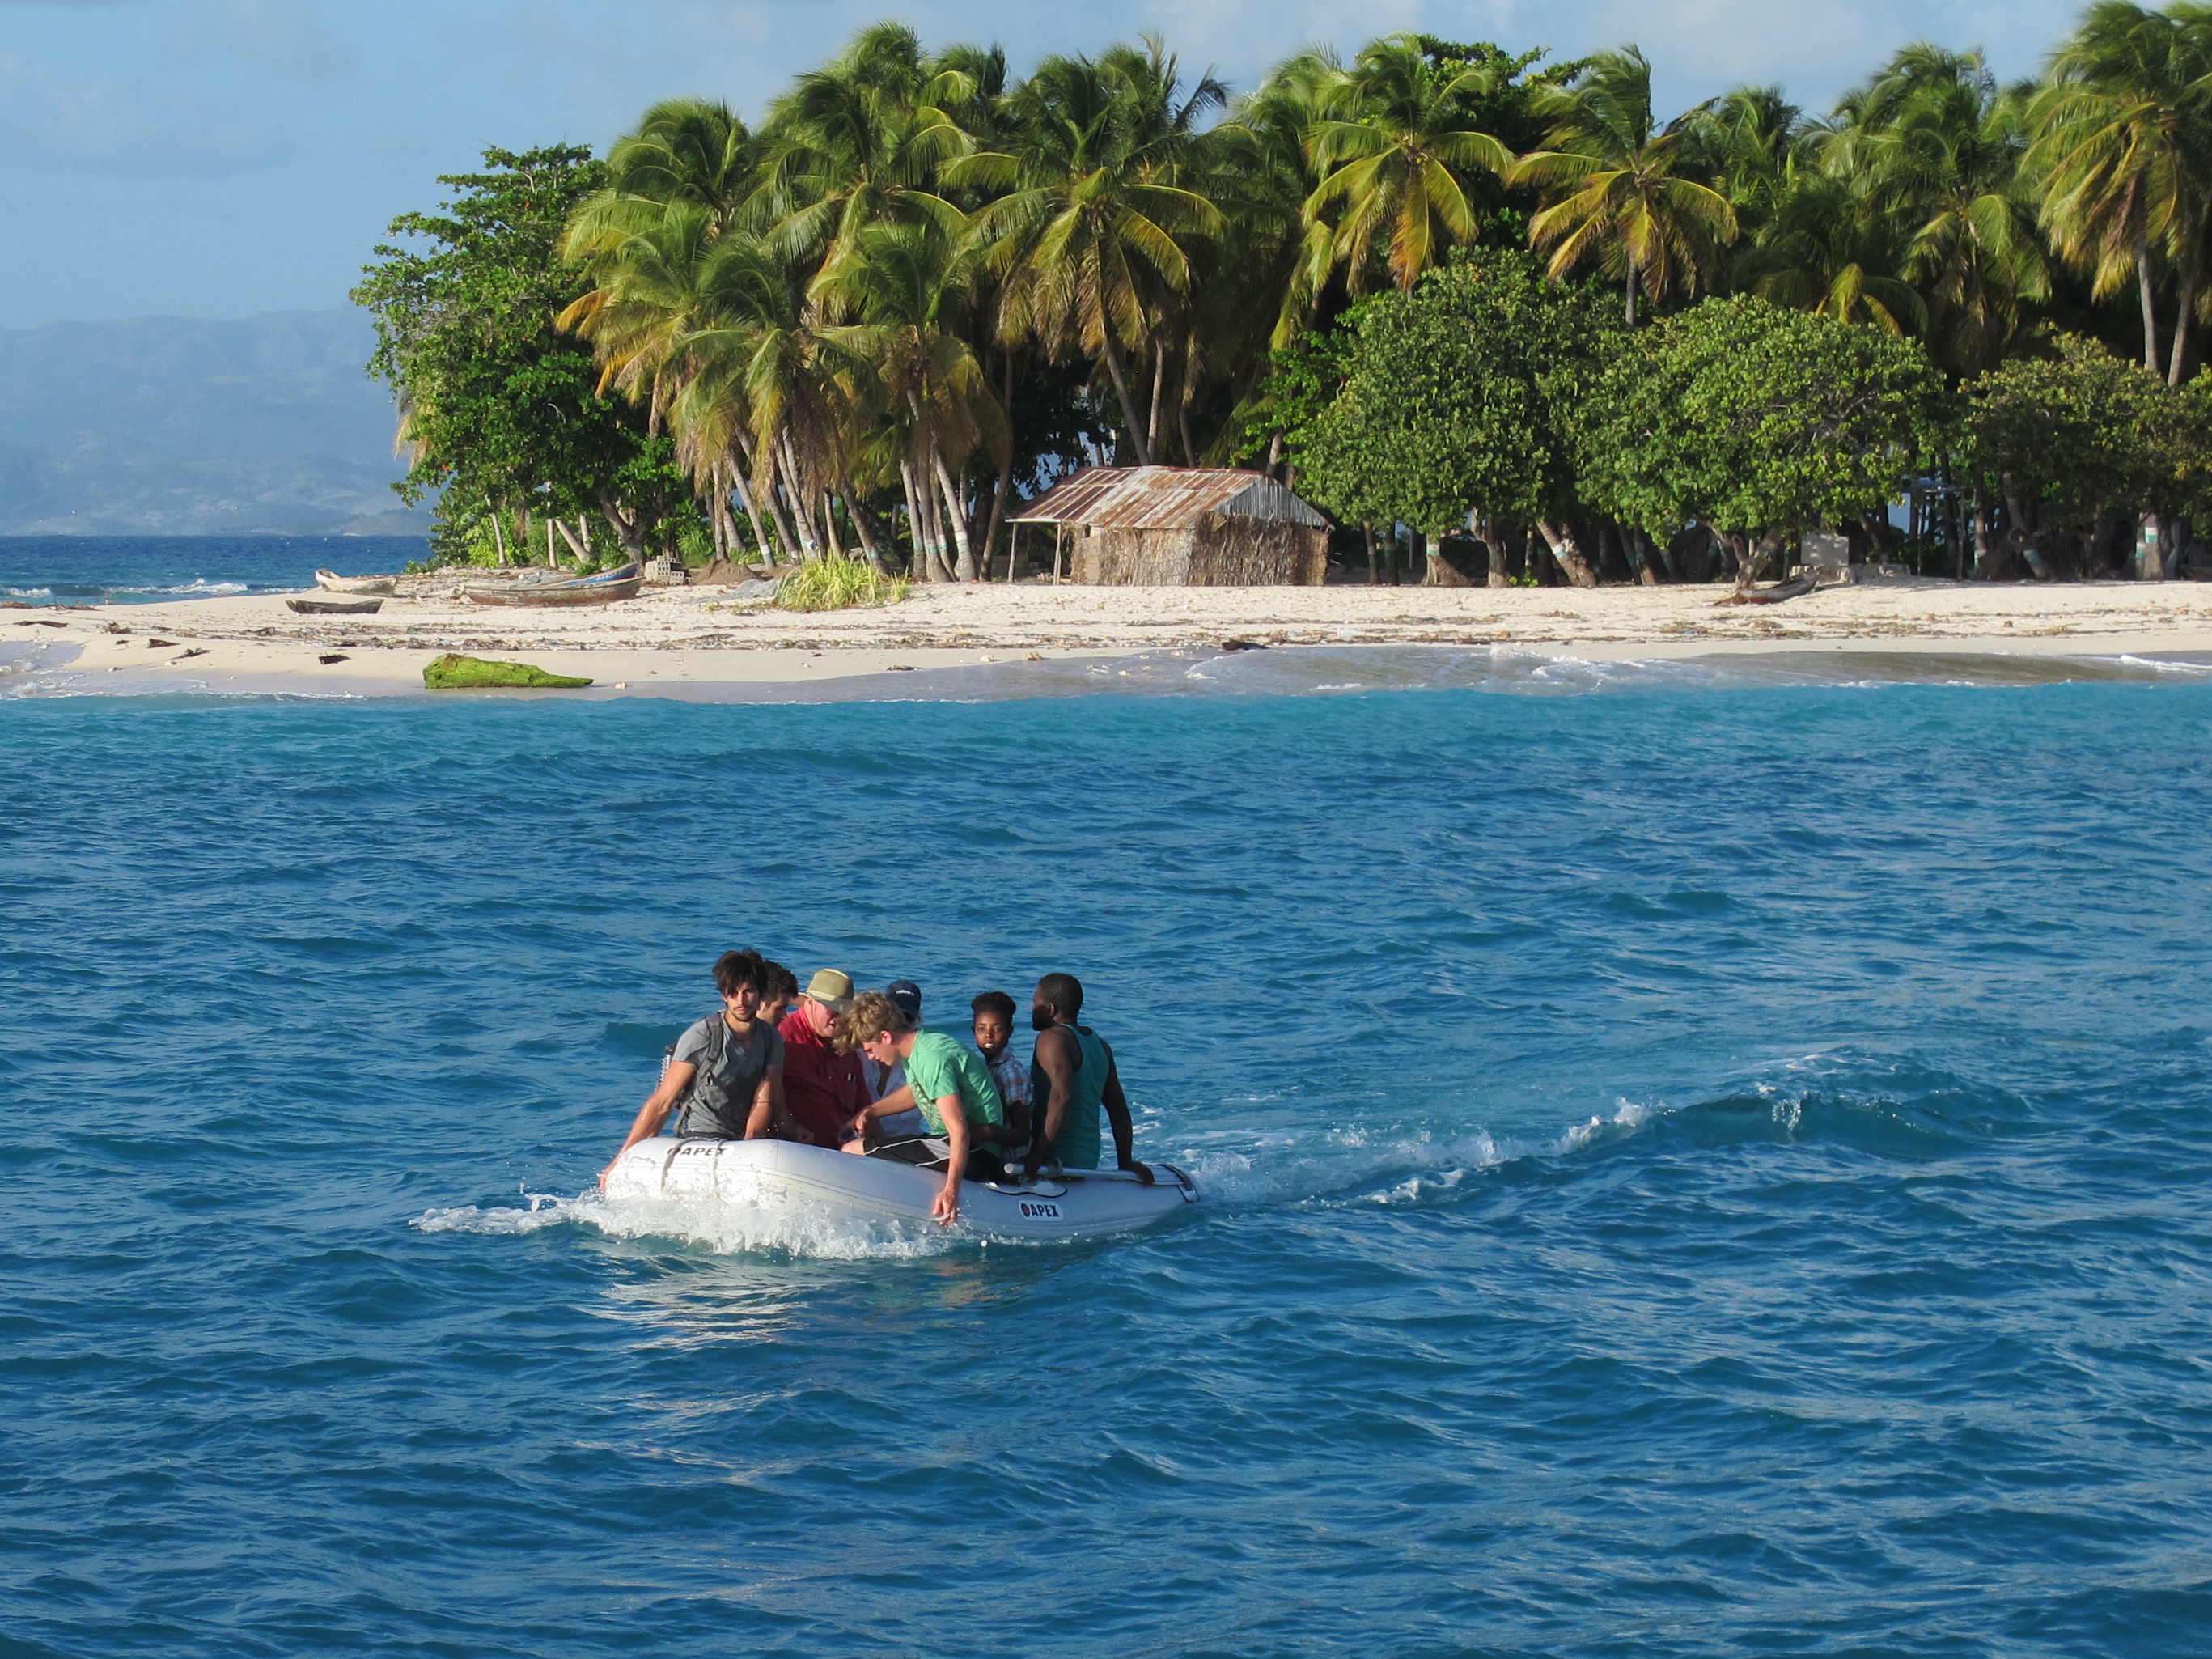 Taking the dinghy into the island